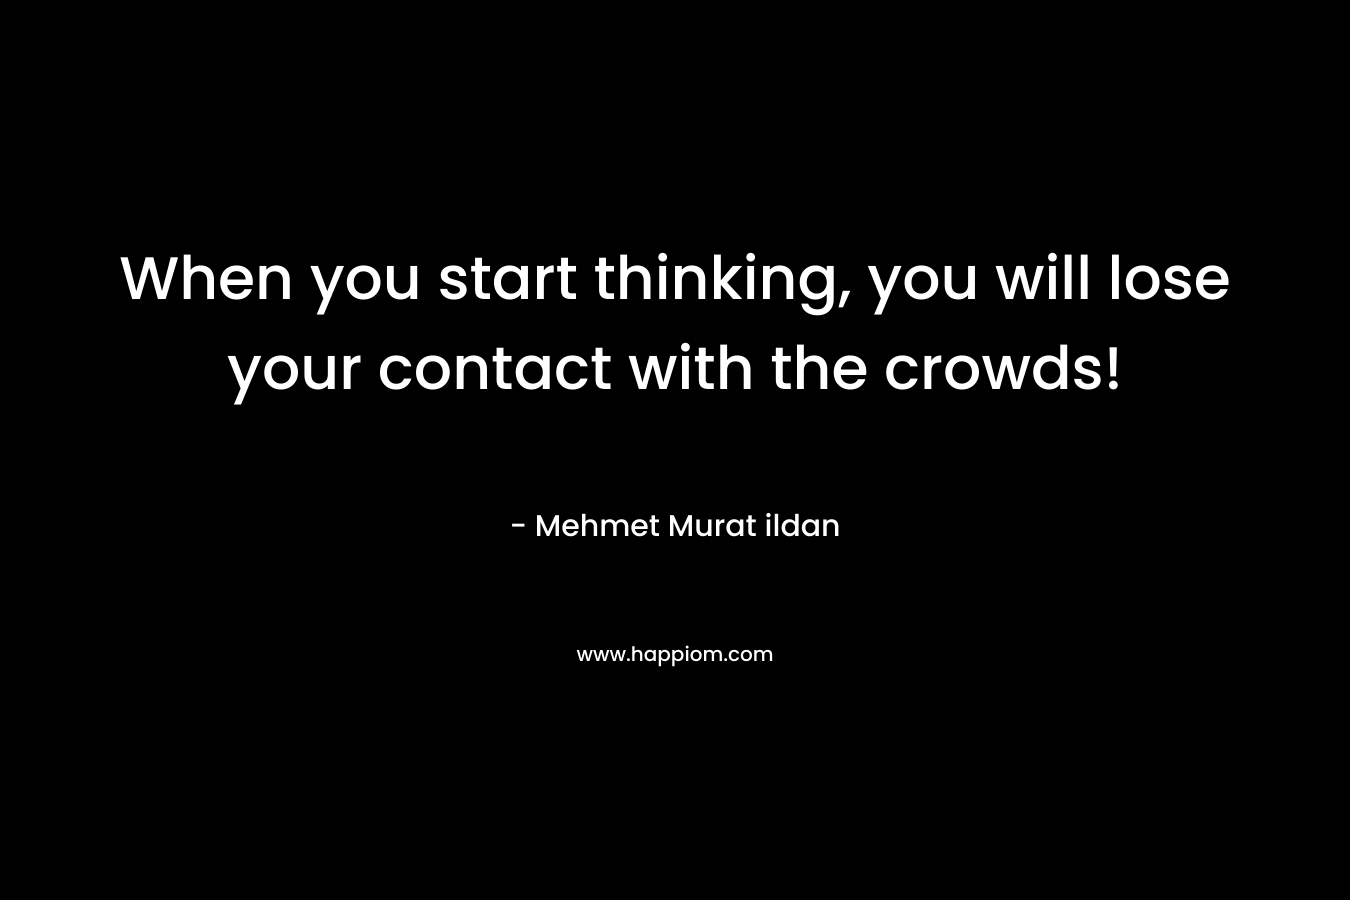 When you start thinking, you will lose your contact with the crowds! – Mehmet Murat ildan